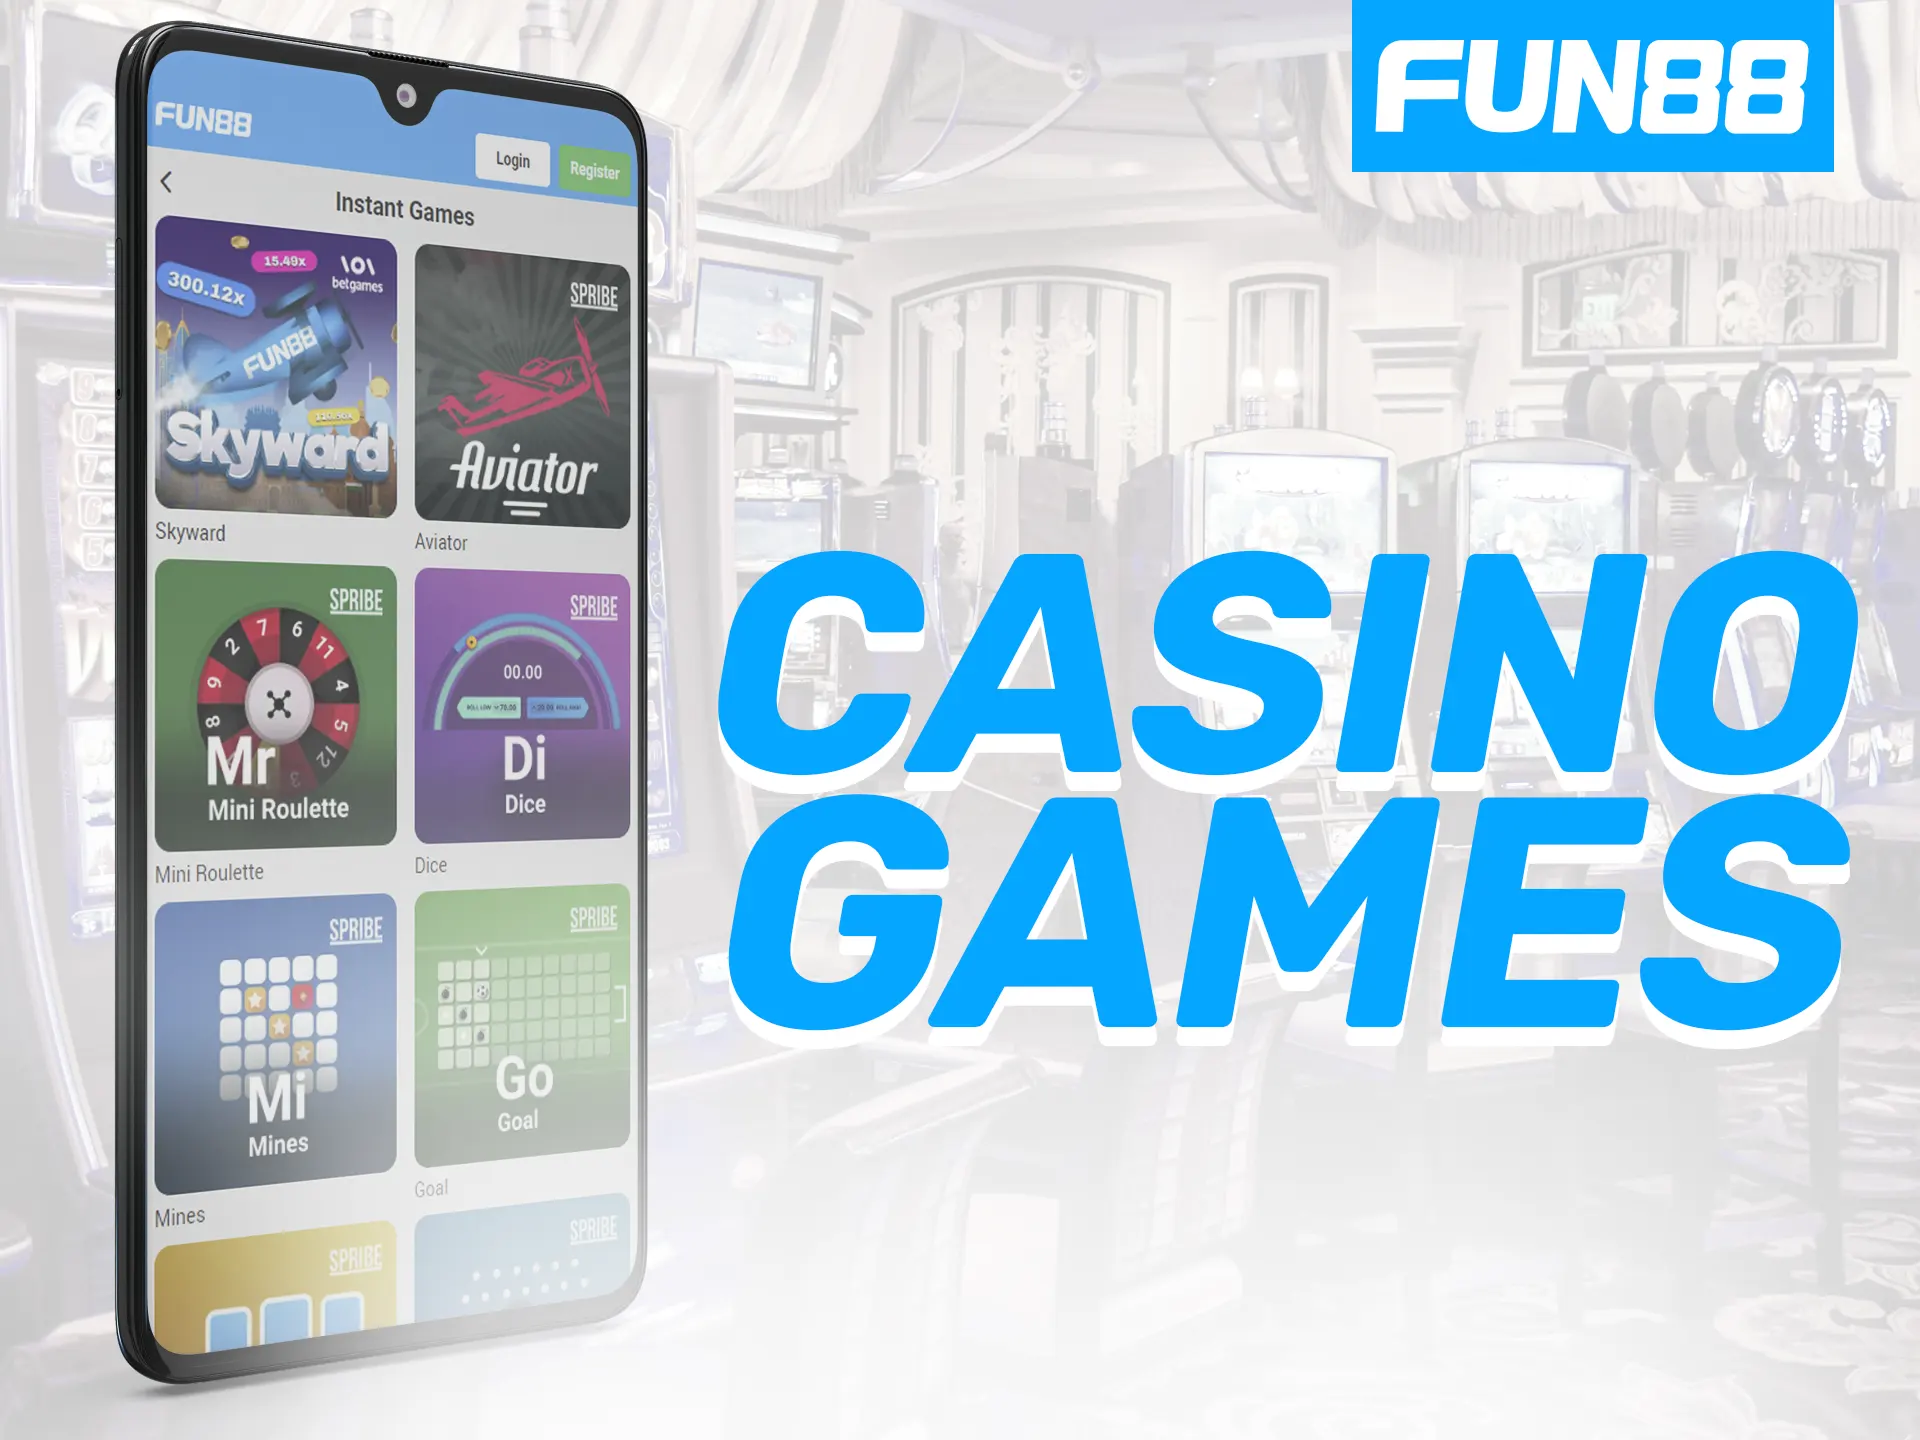 Fun88 app offers diverse casino games: Instant games, Card games, Lottery, and Virtual games.